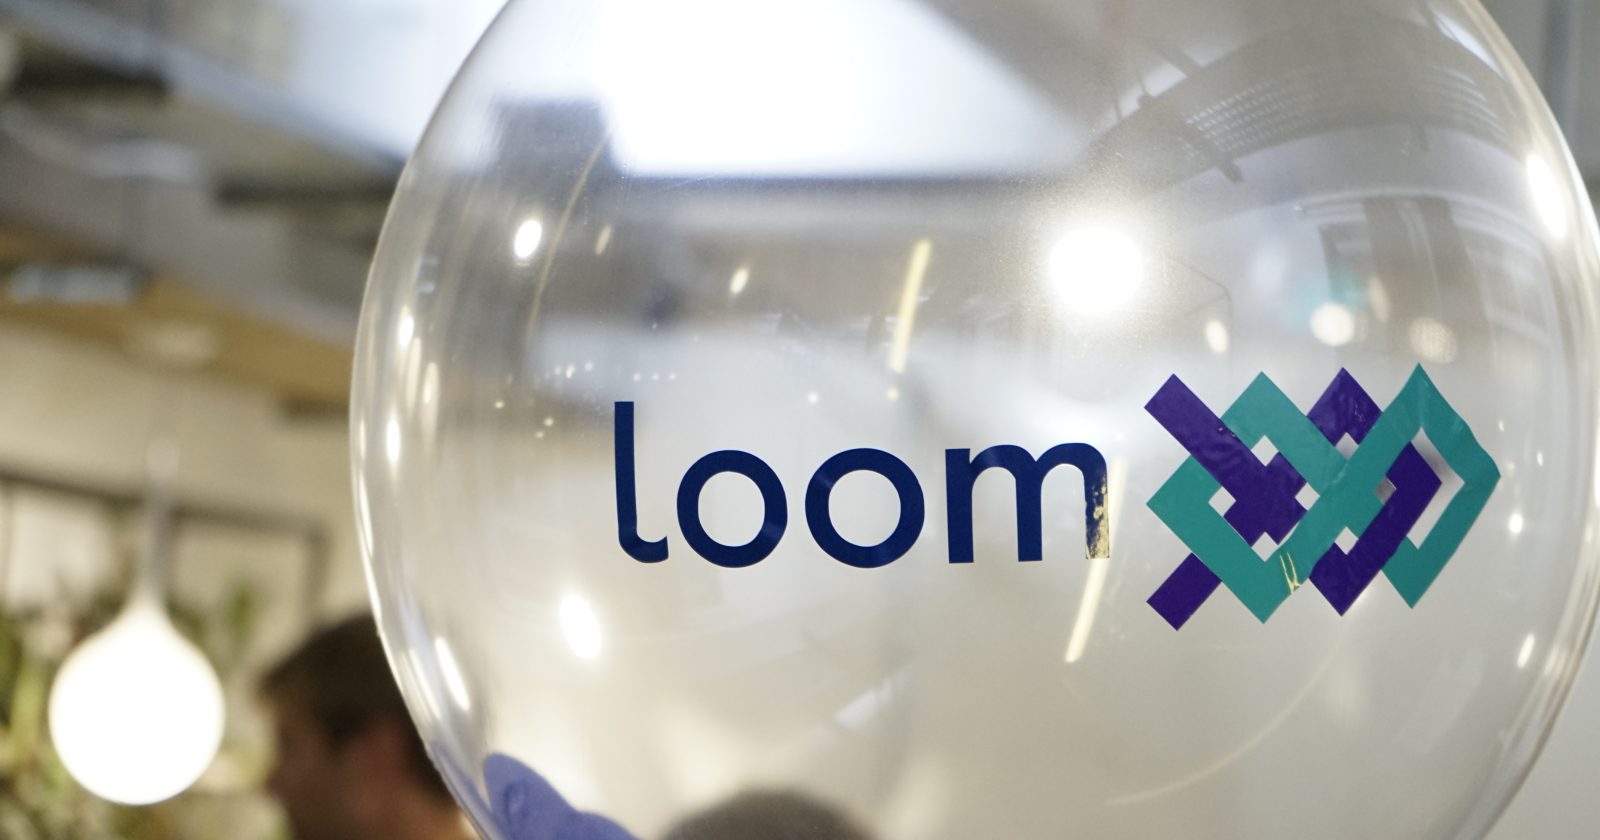 Loom launch party balloon